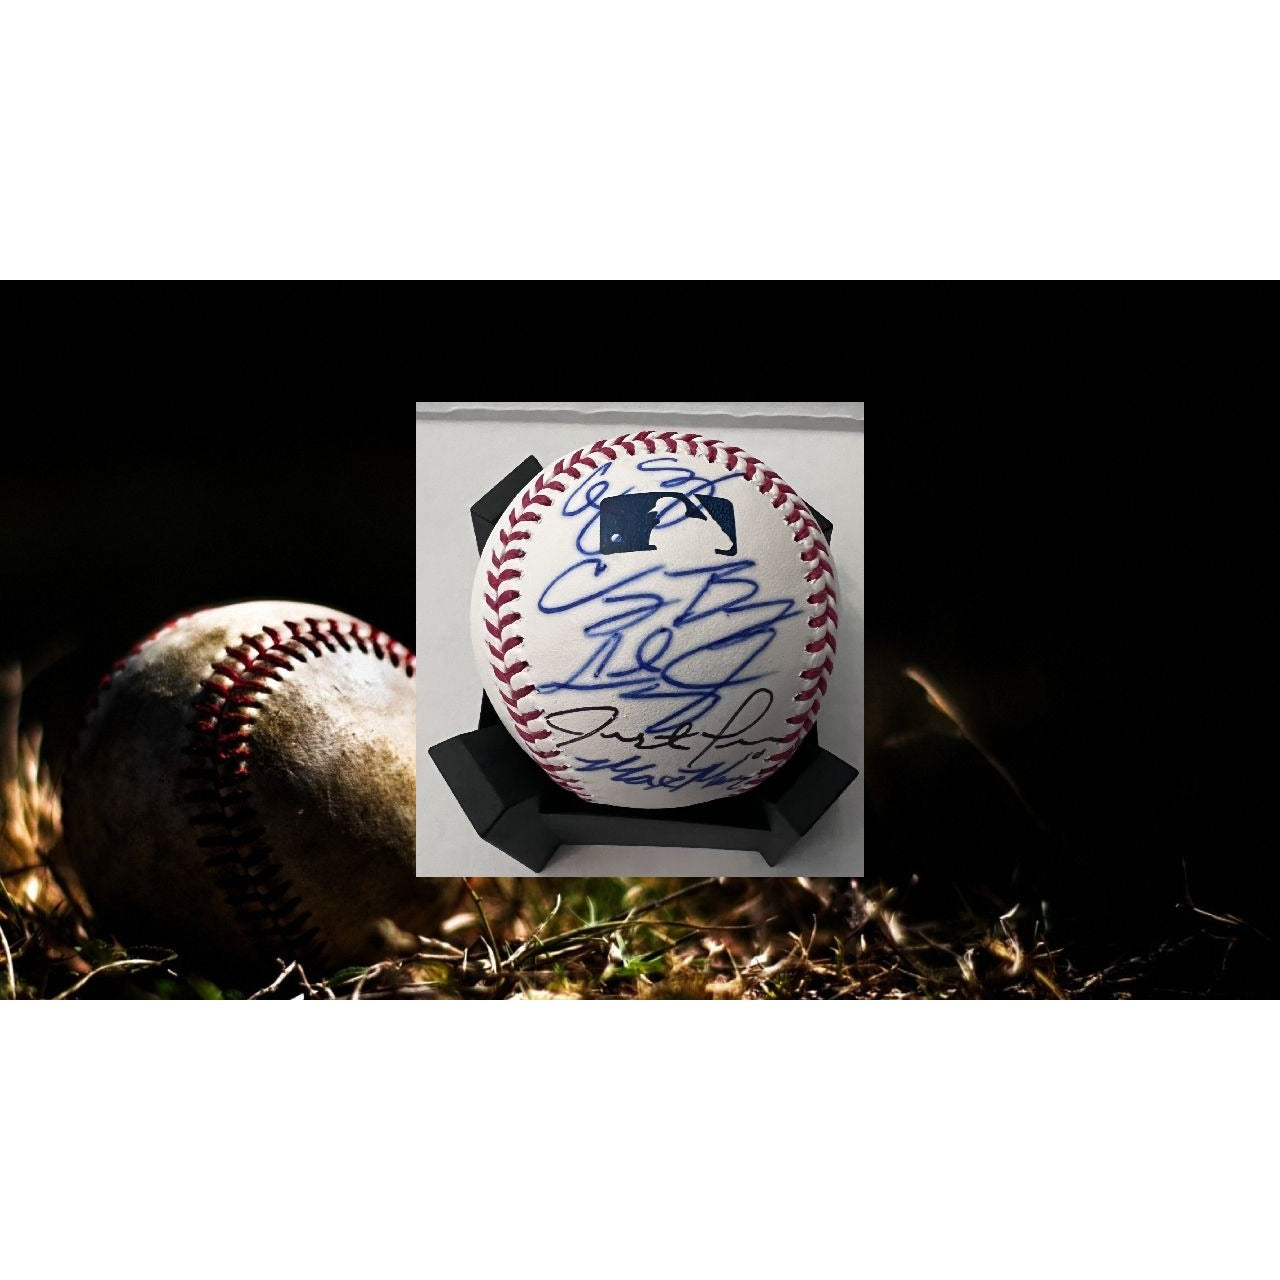 Corey Seager Cody Bellinger Max Muncie Justin Turner Chris Taylor Los Angeles Dodgers official Rawlings Major League Baseball signed with pr